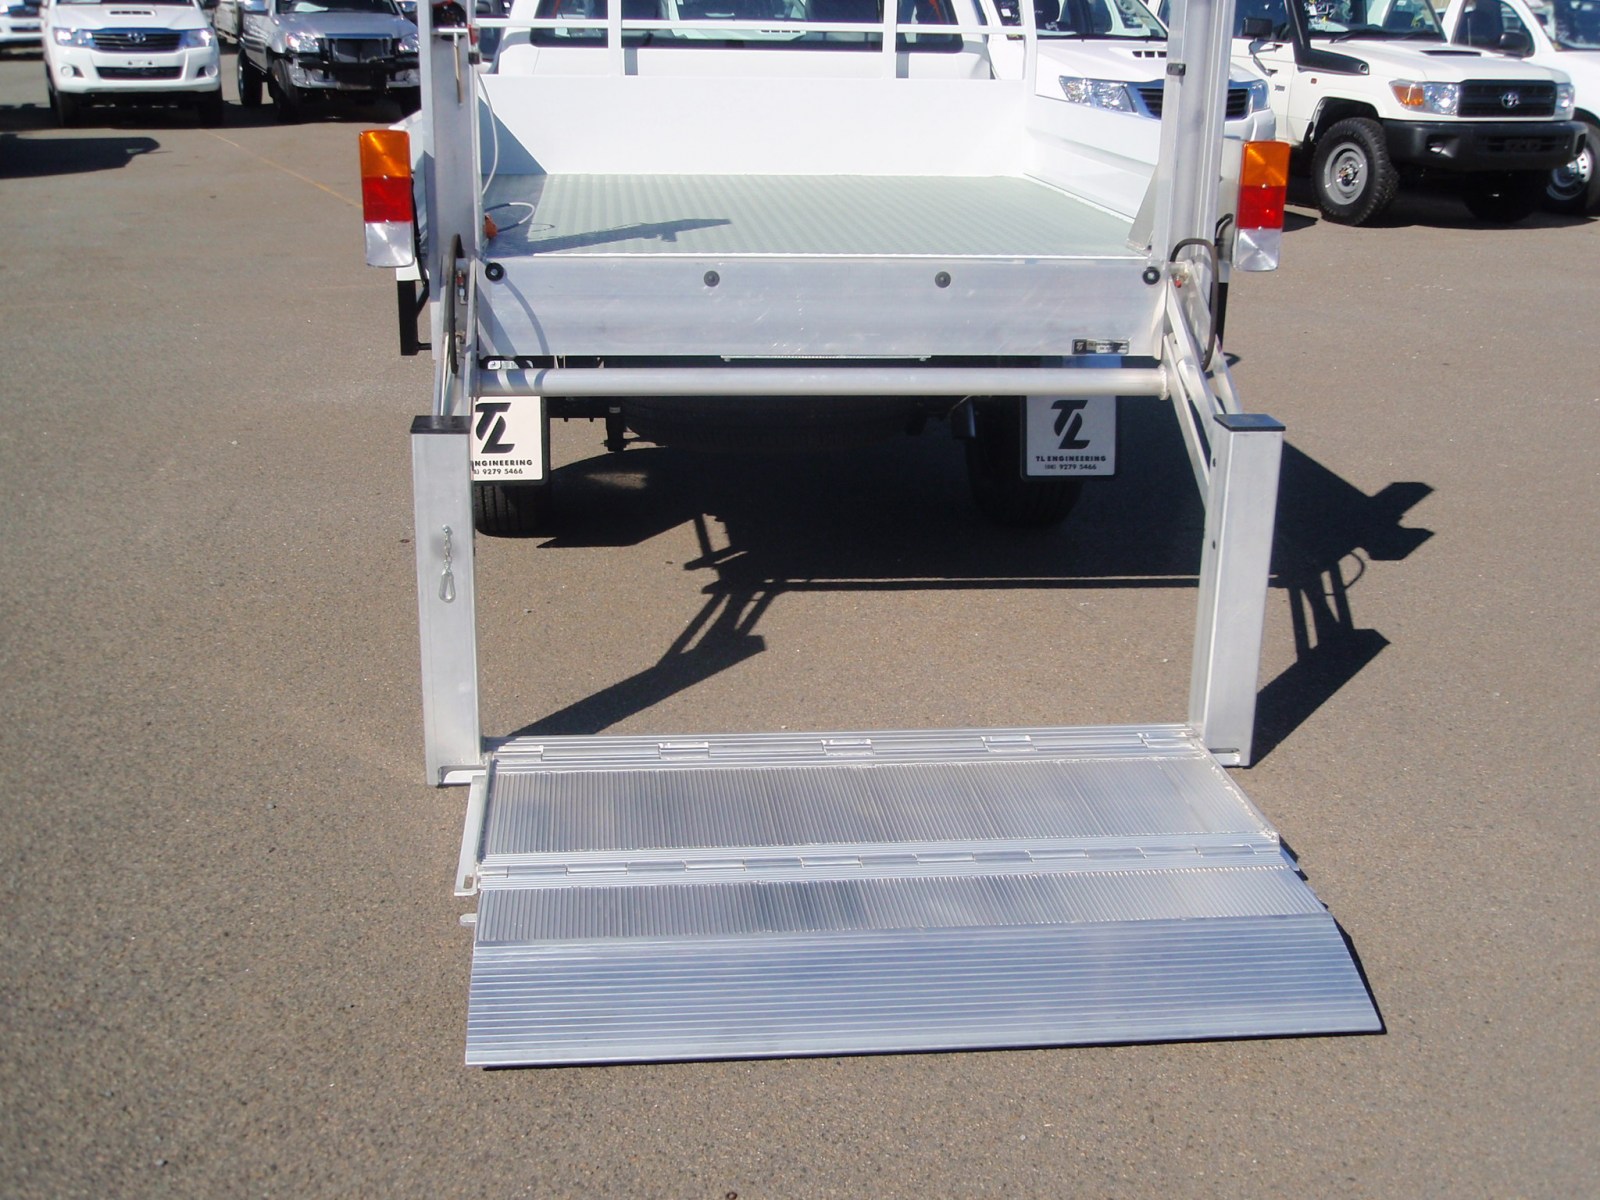 Ute and truck tail lift made in Perth.